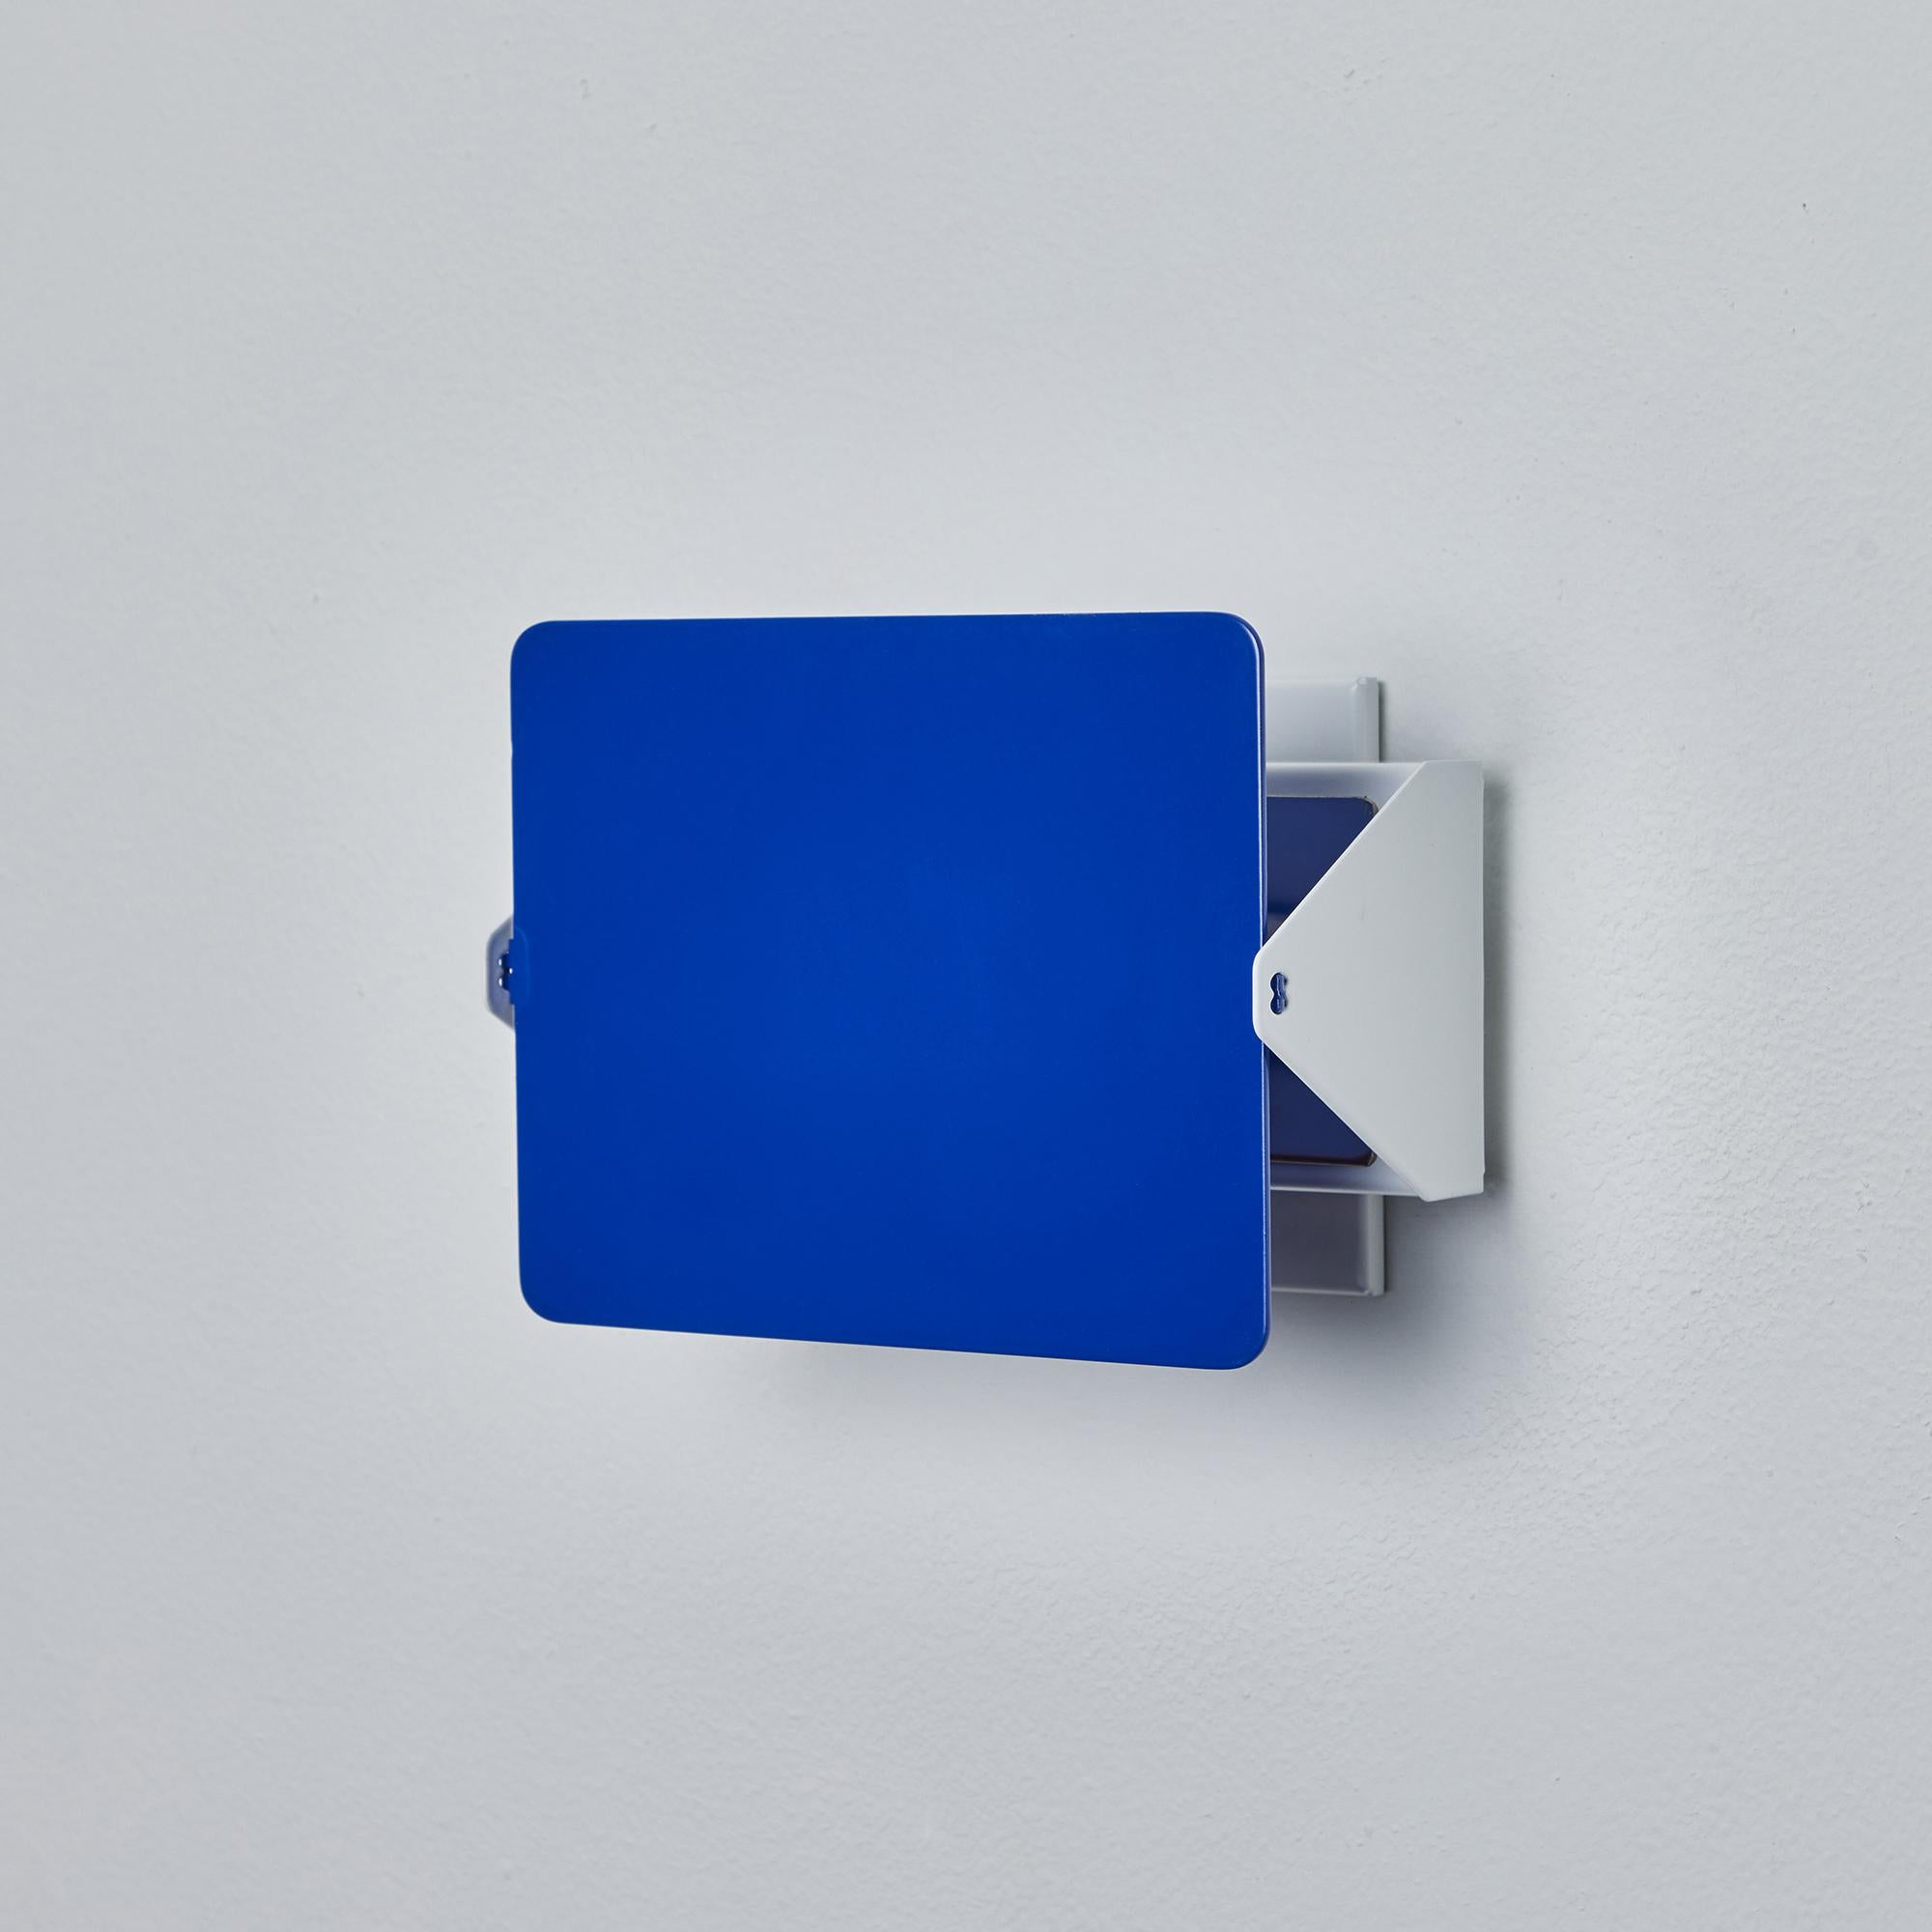 Contemporary Charlotte Perriand 'Applique à Volet Pivotant' Wall Light in Blue for Nemo For Sale